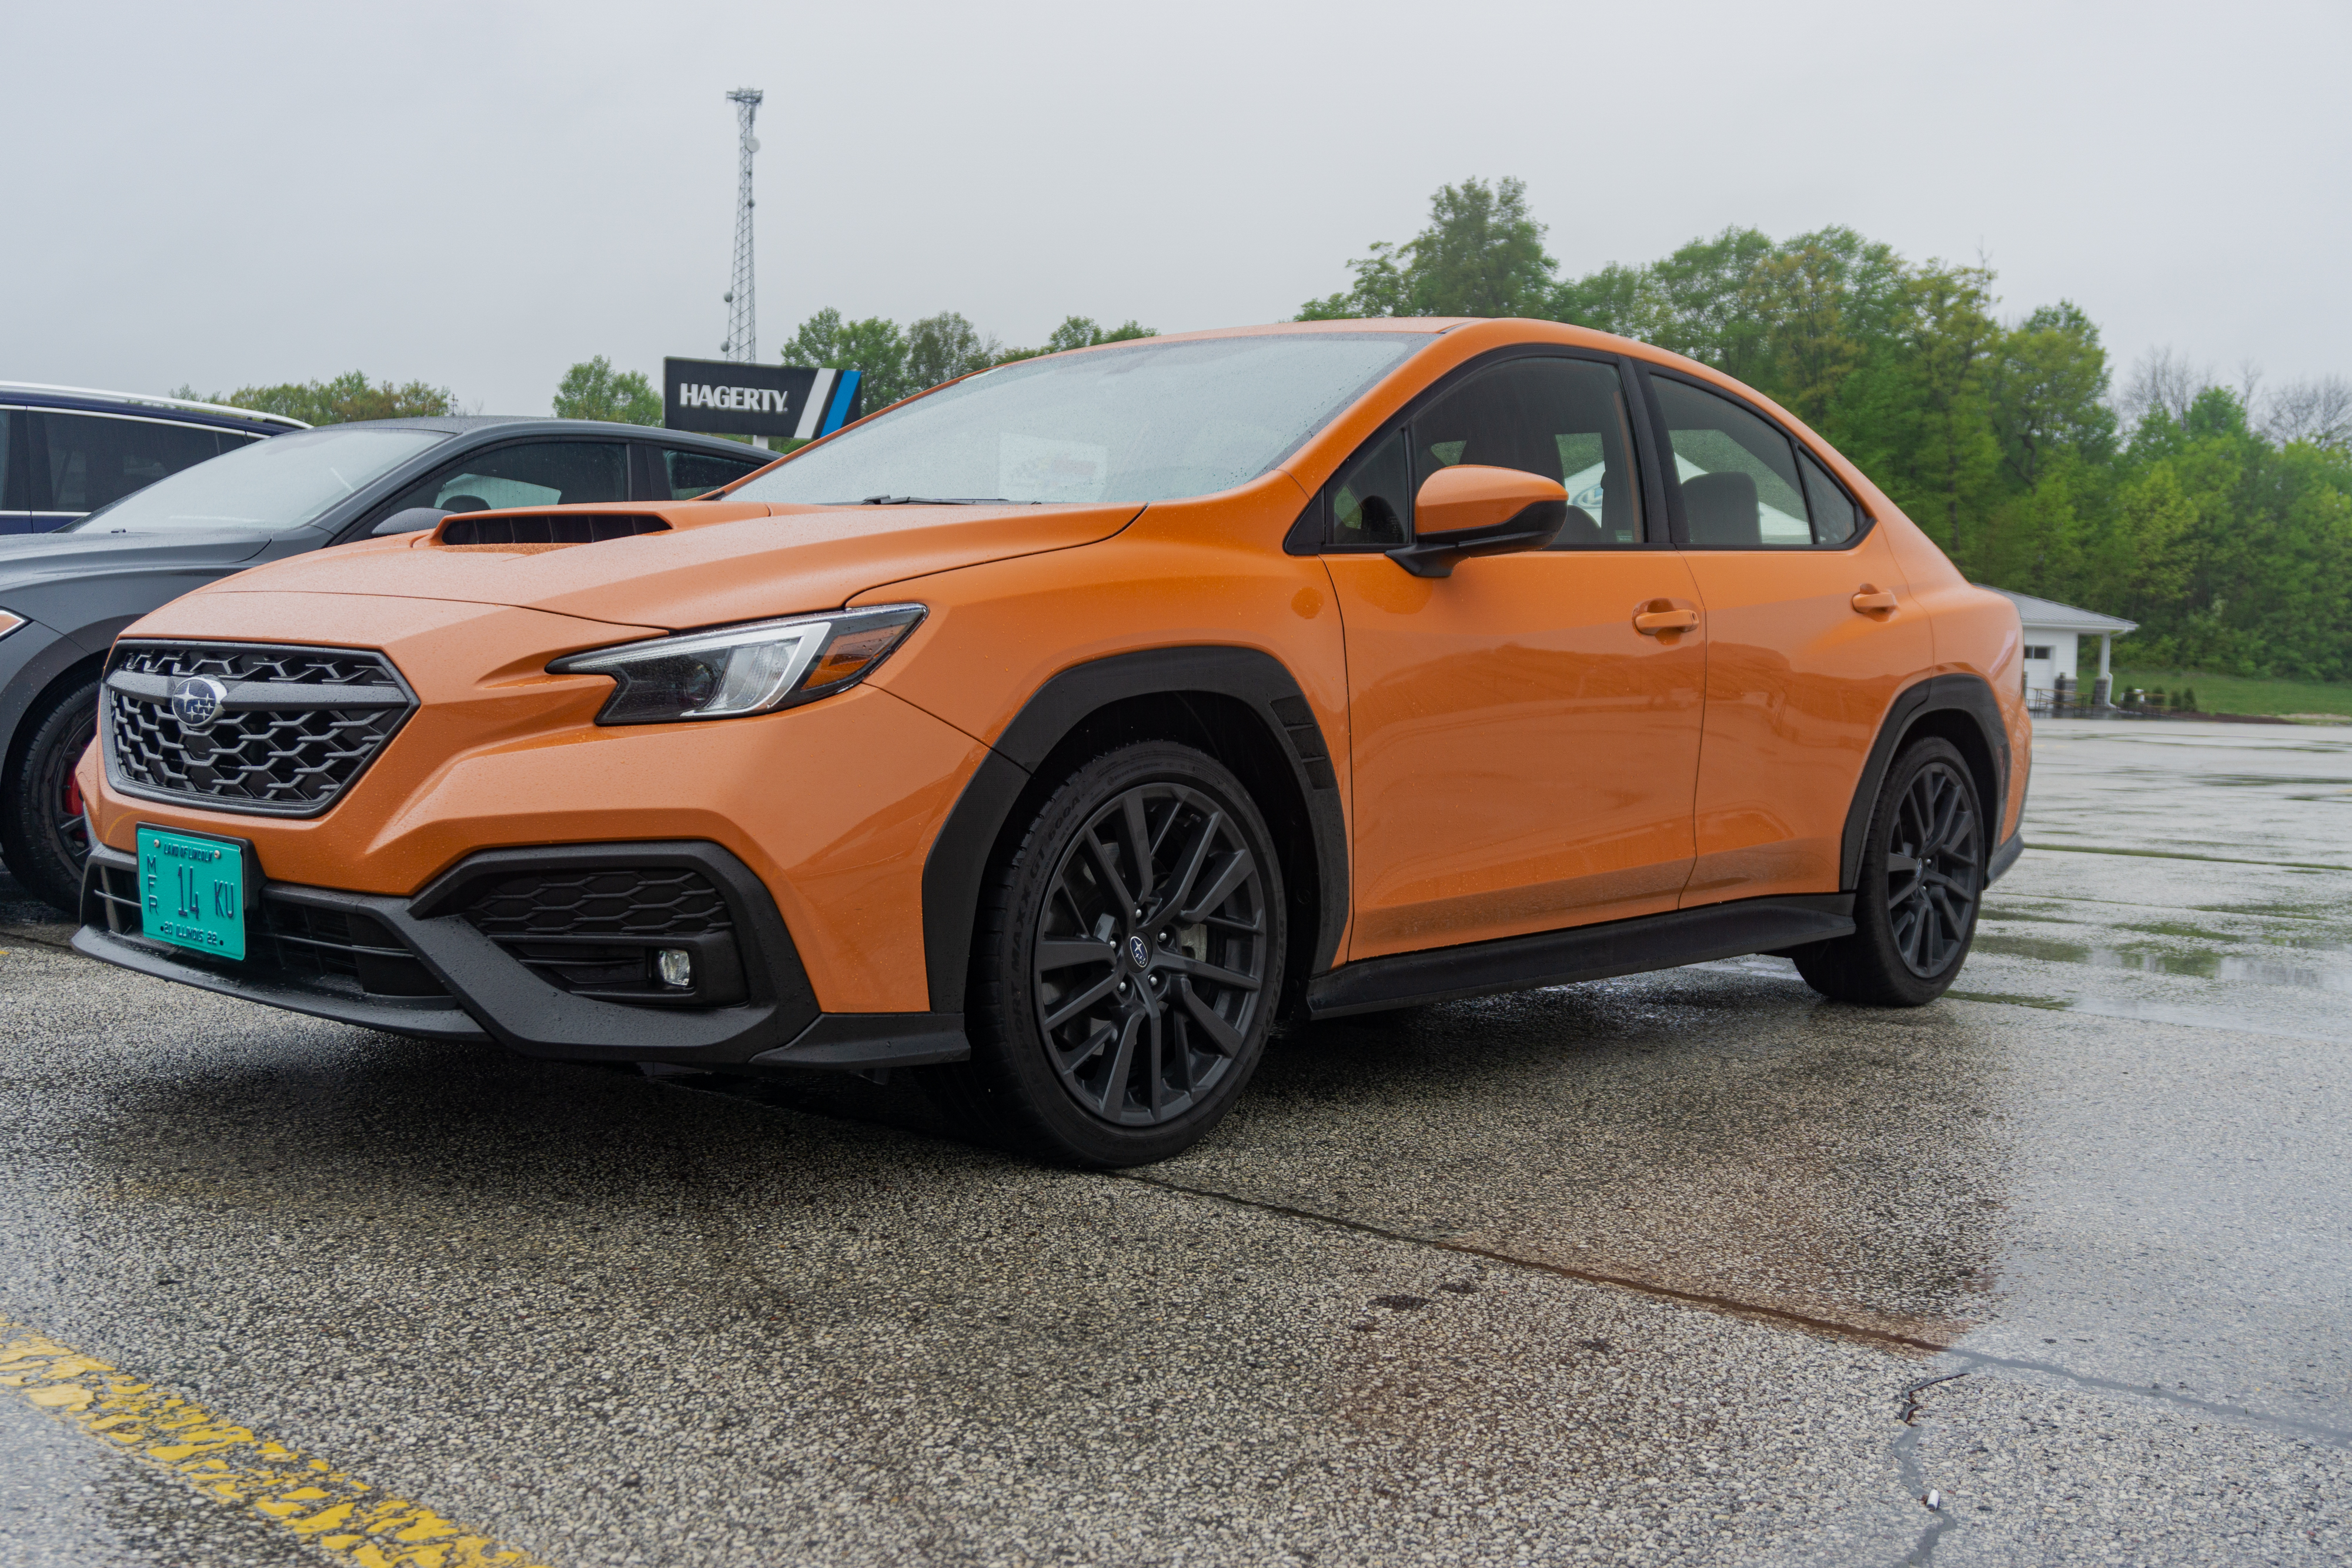 The front 3/4 view of an orange 2022 Subaru WRX Premium in the Road America parking lot